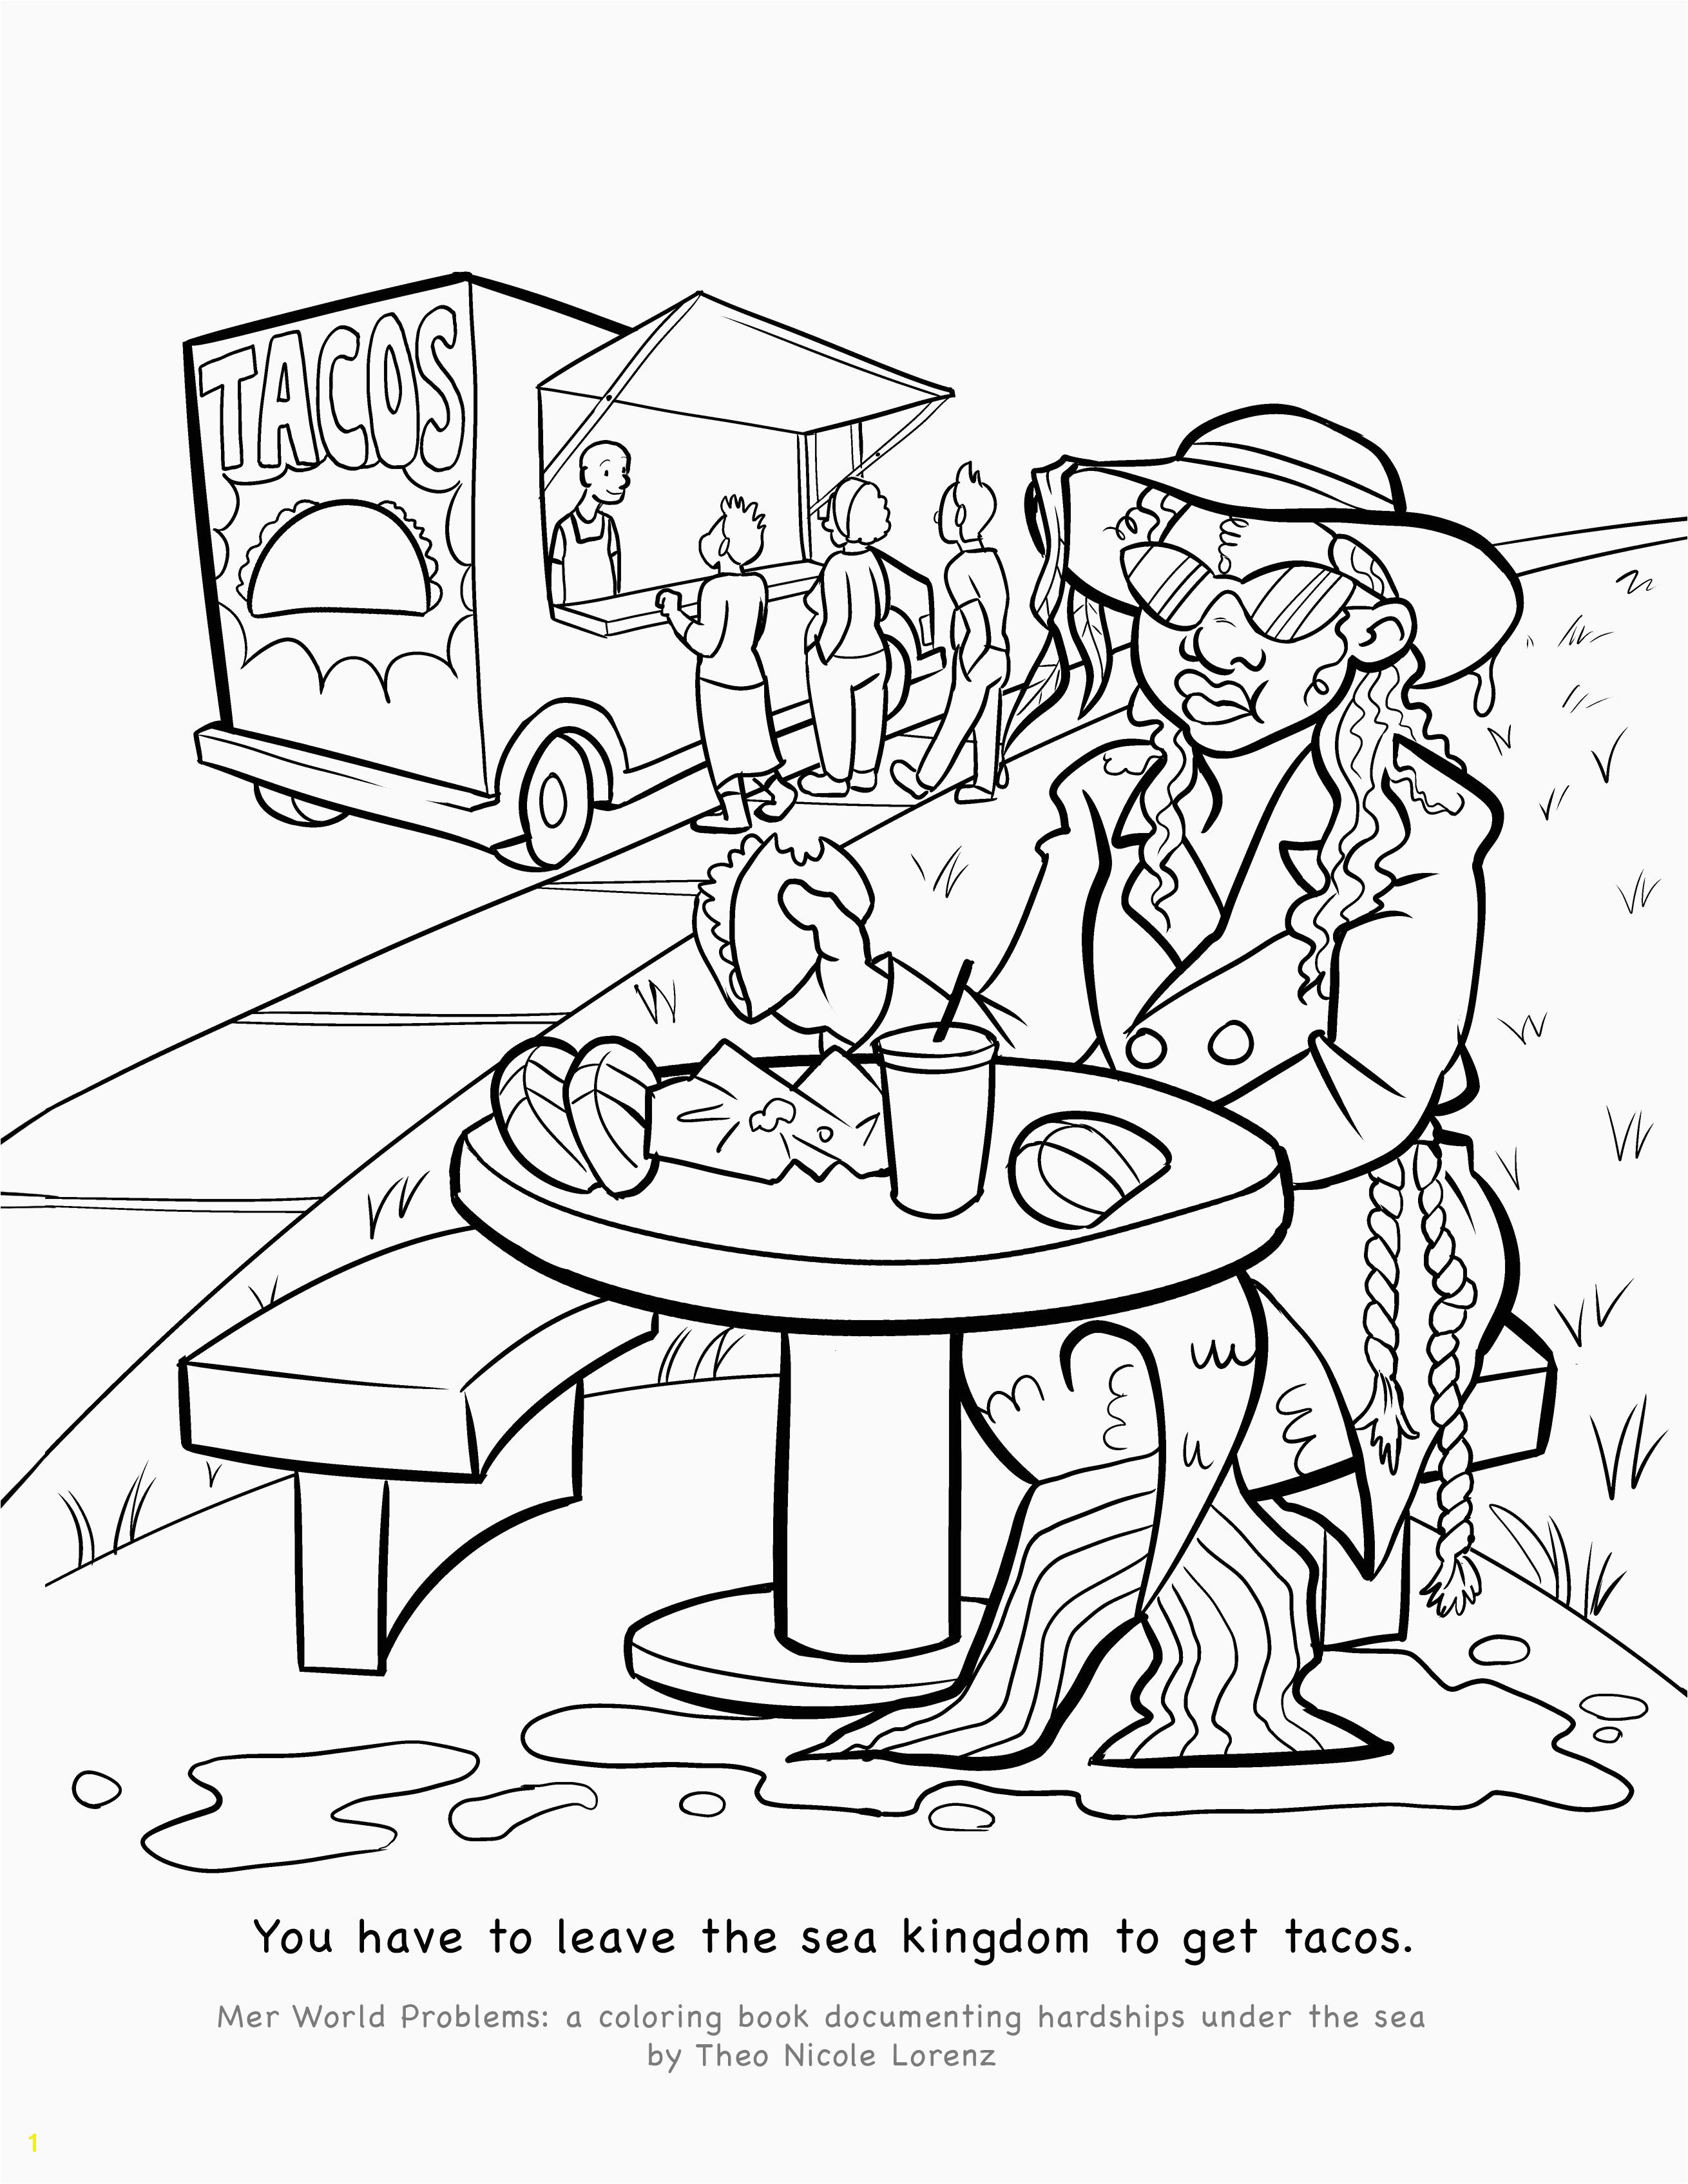 Thank You Coloring Pages New Coloring Pic Luxury Free Coloring Pages